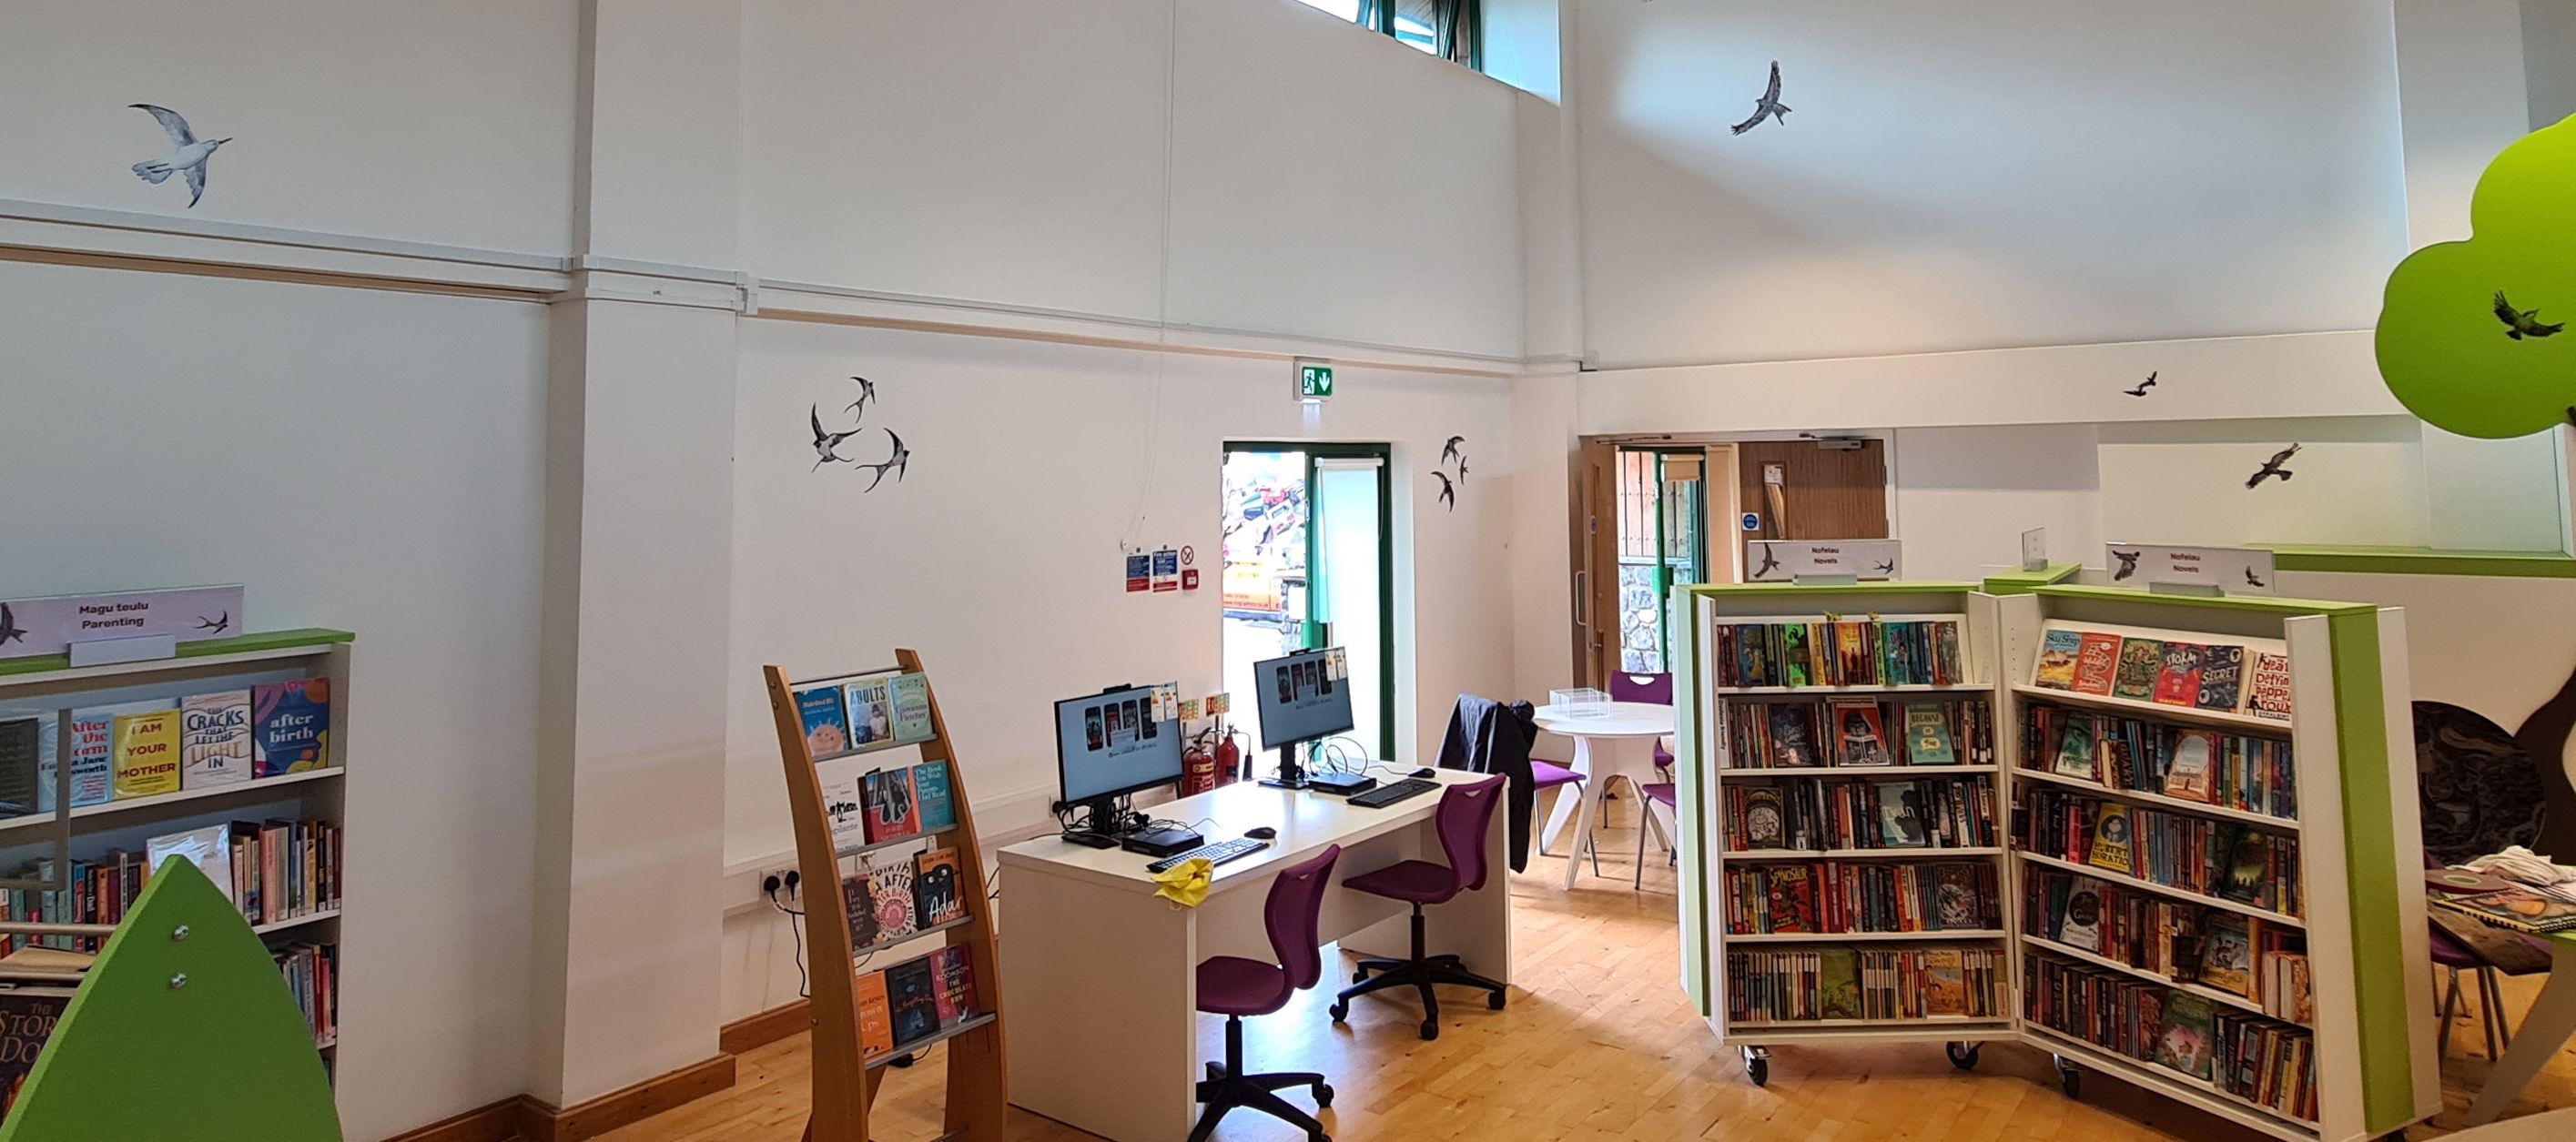 Bird graphics on walls above children’s library